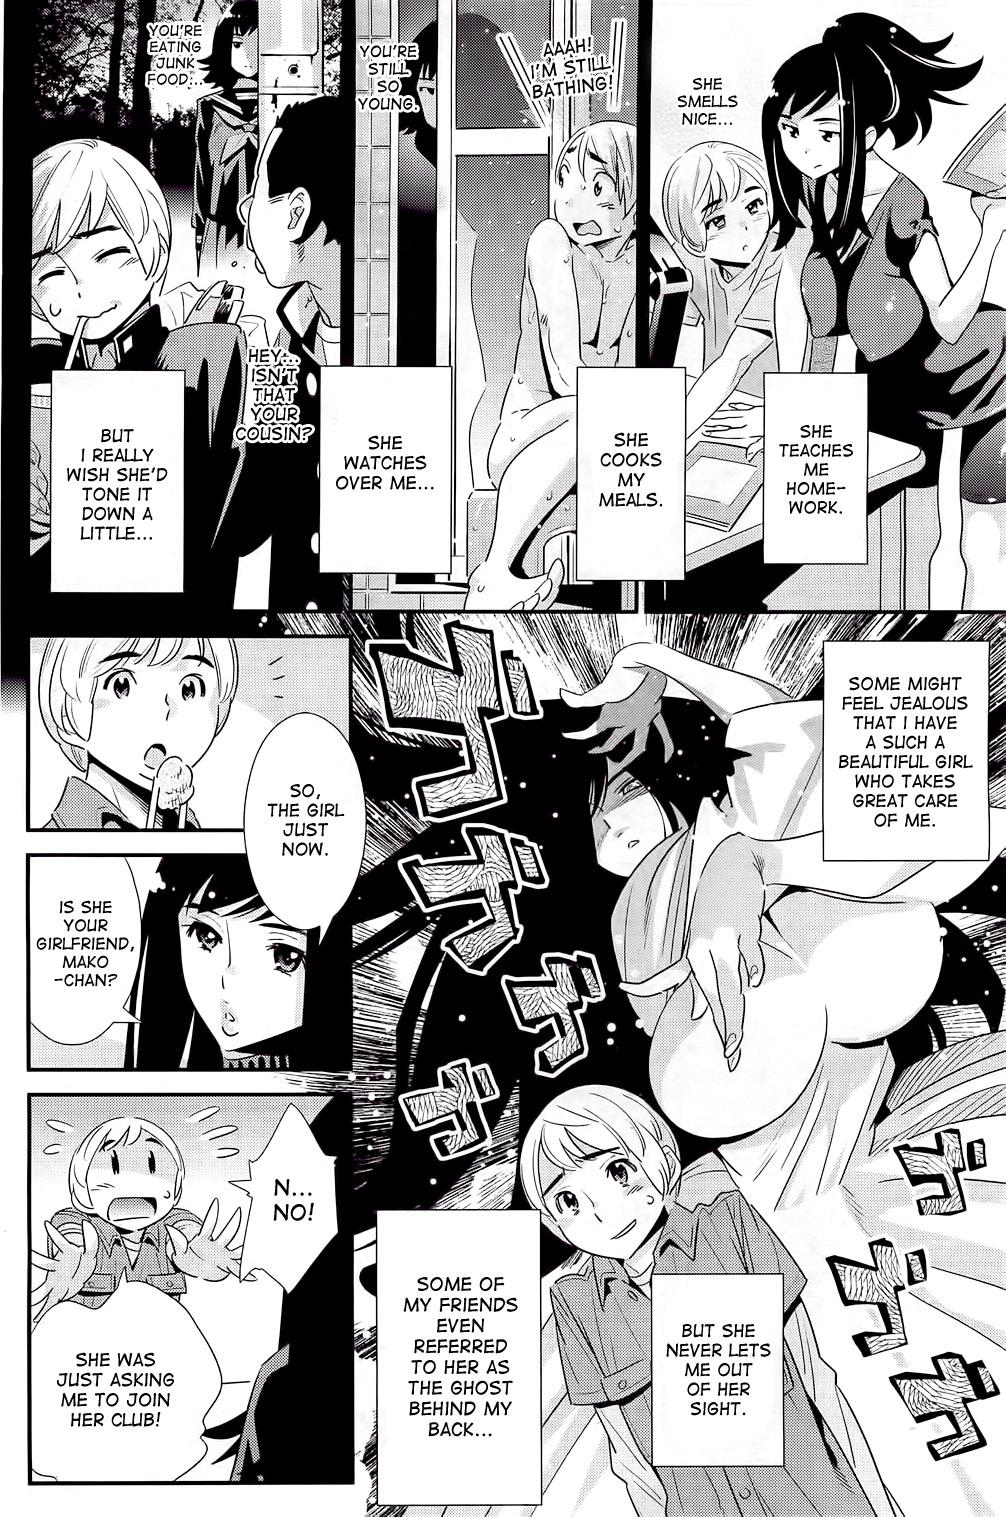 Asians Boku no Haigorei? | The Ghost Behind My Back Abuse - Page 4